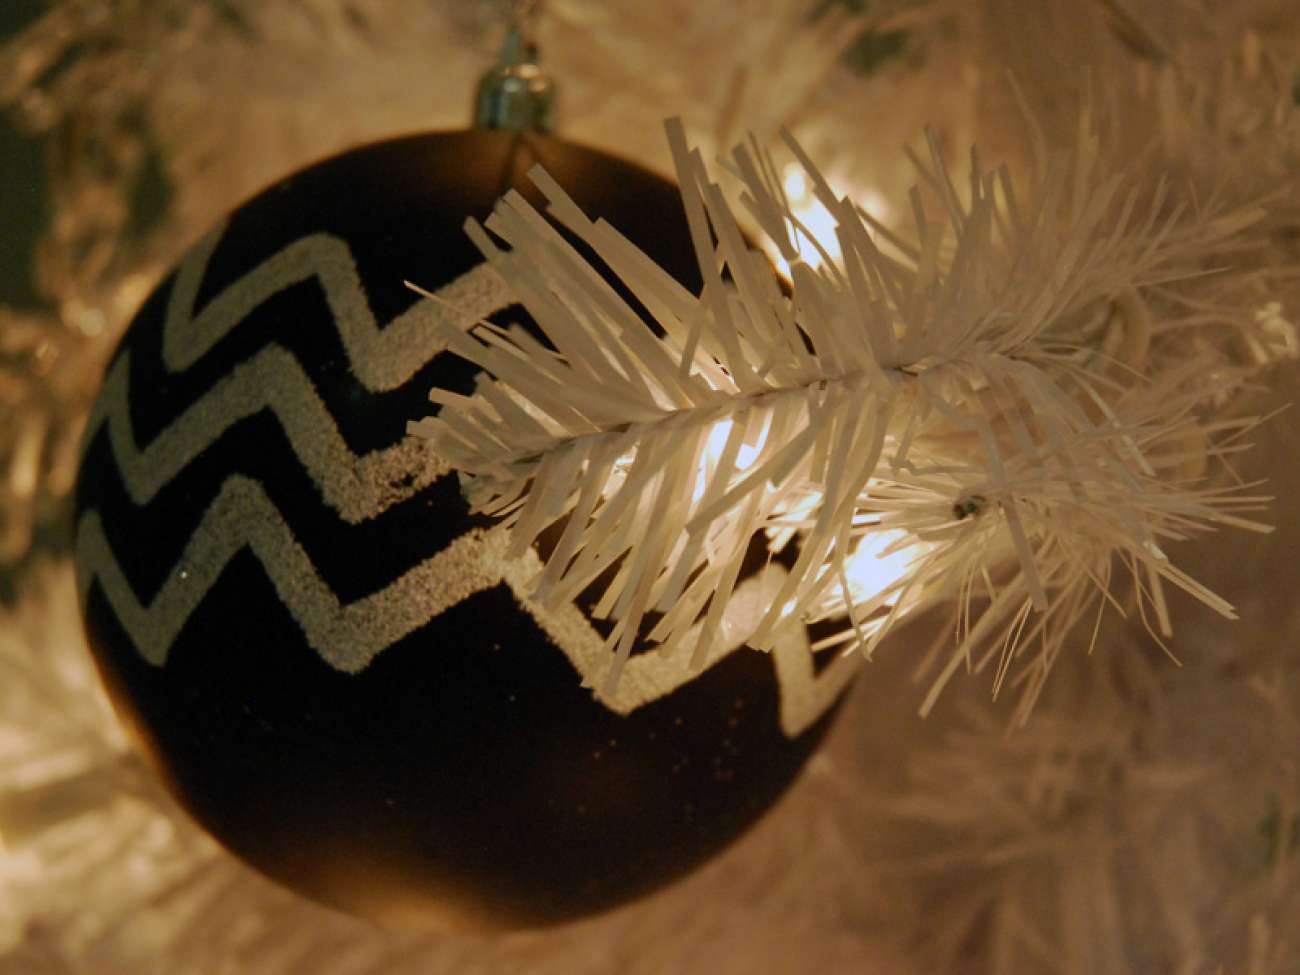 Blake chose a white tree with black ornaments as newborns can more easily see such contrasting tones.